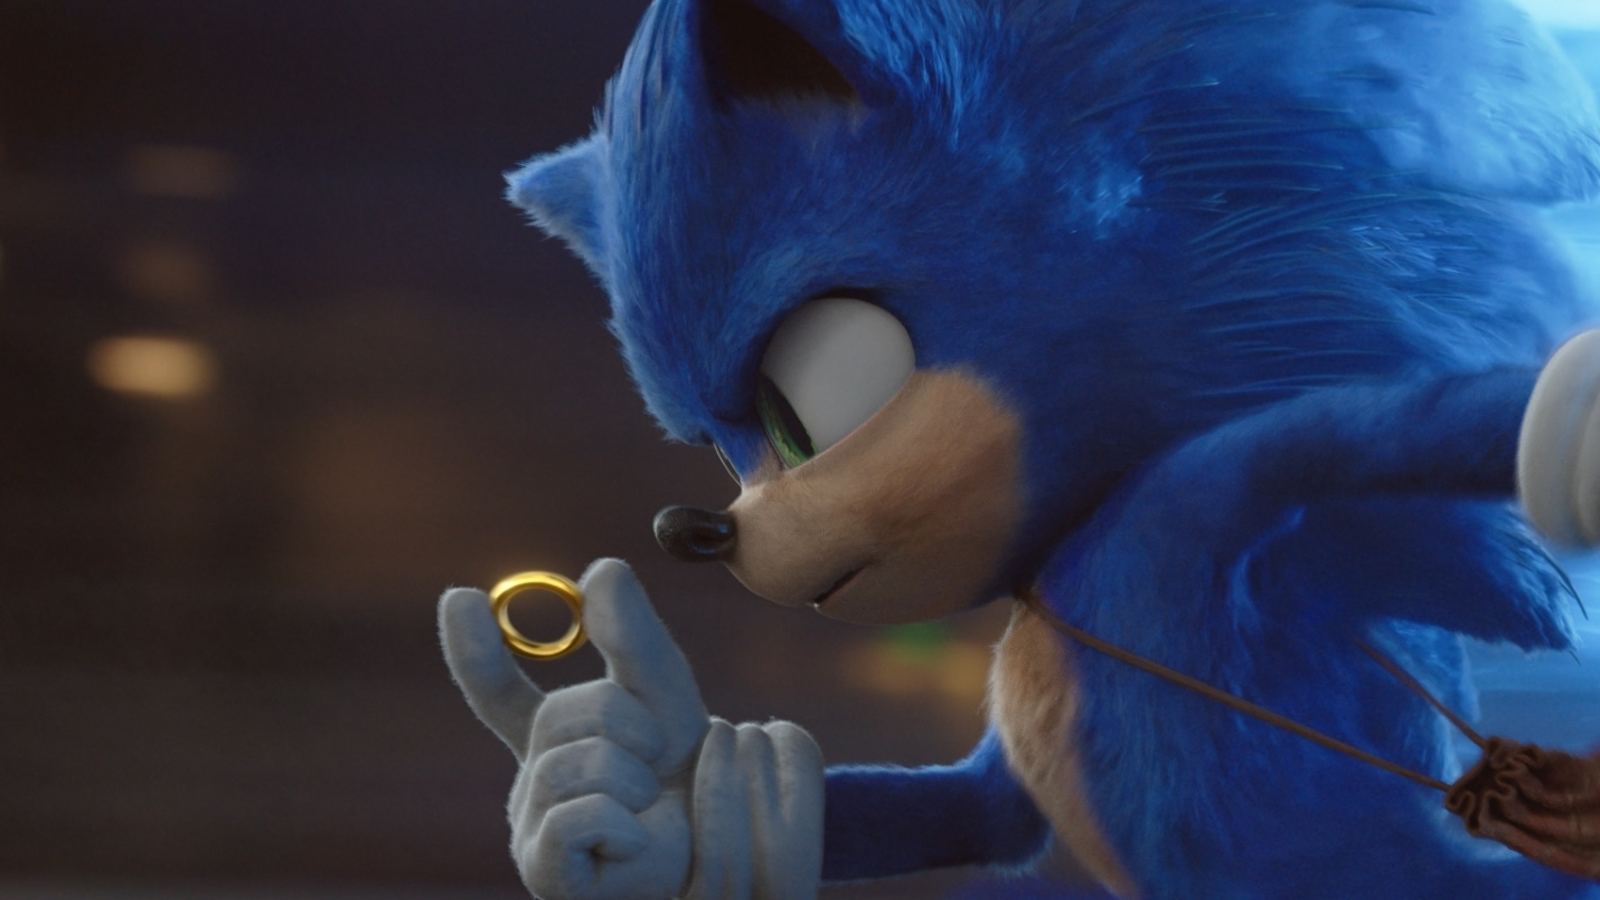 Sonic the Hedgehog on X: Sonic's back and racing against time in